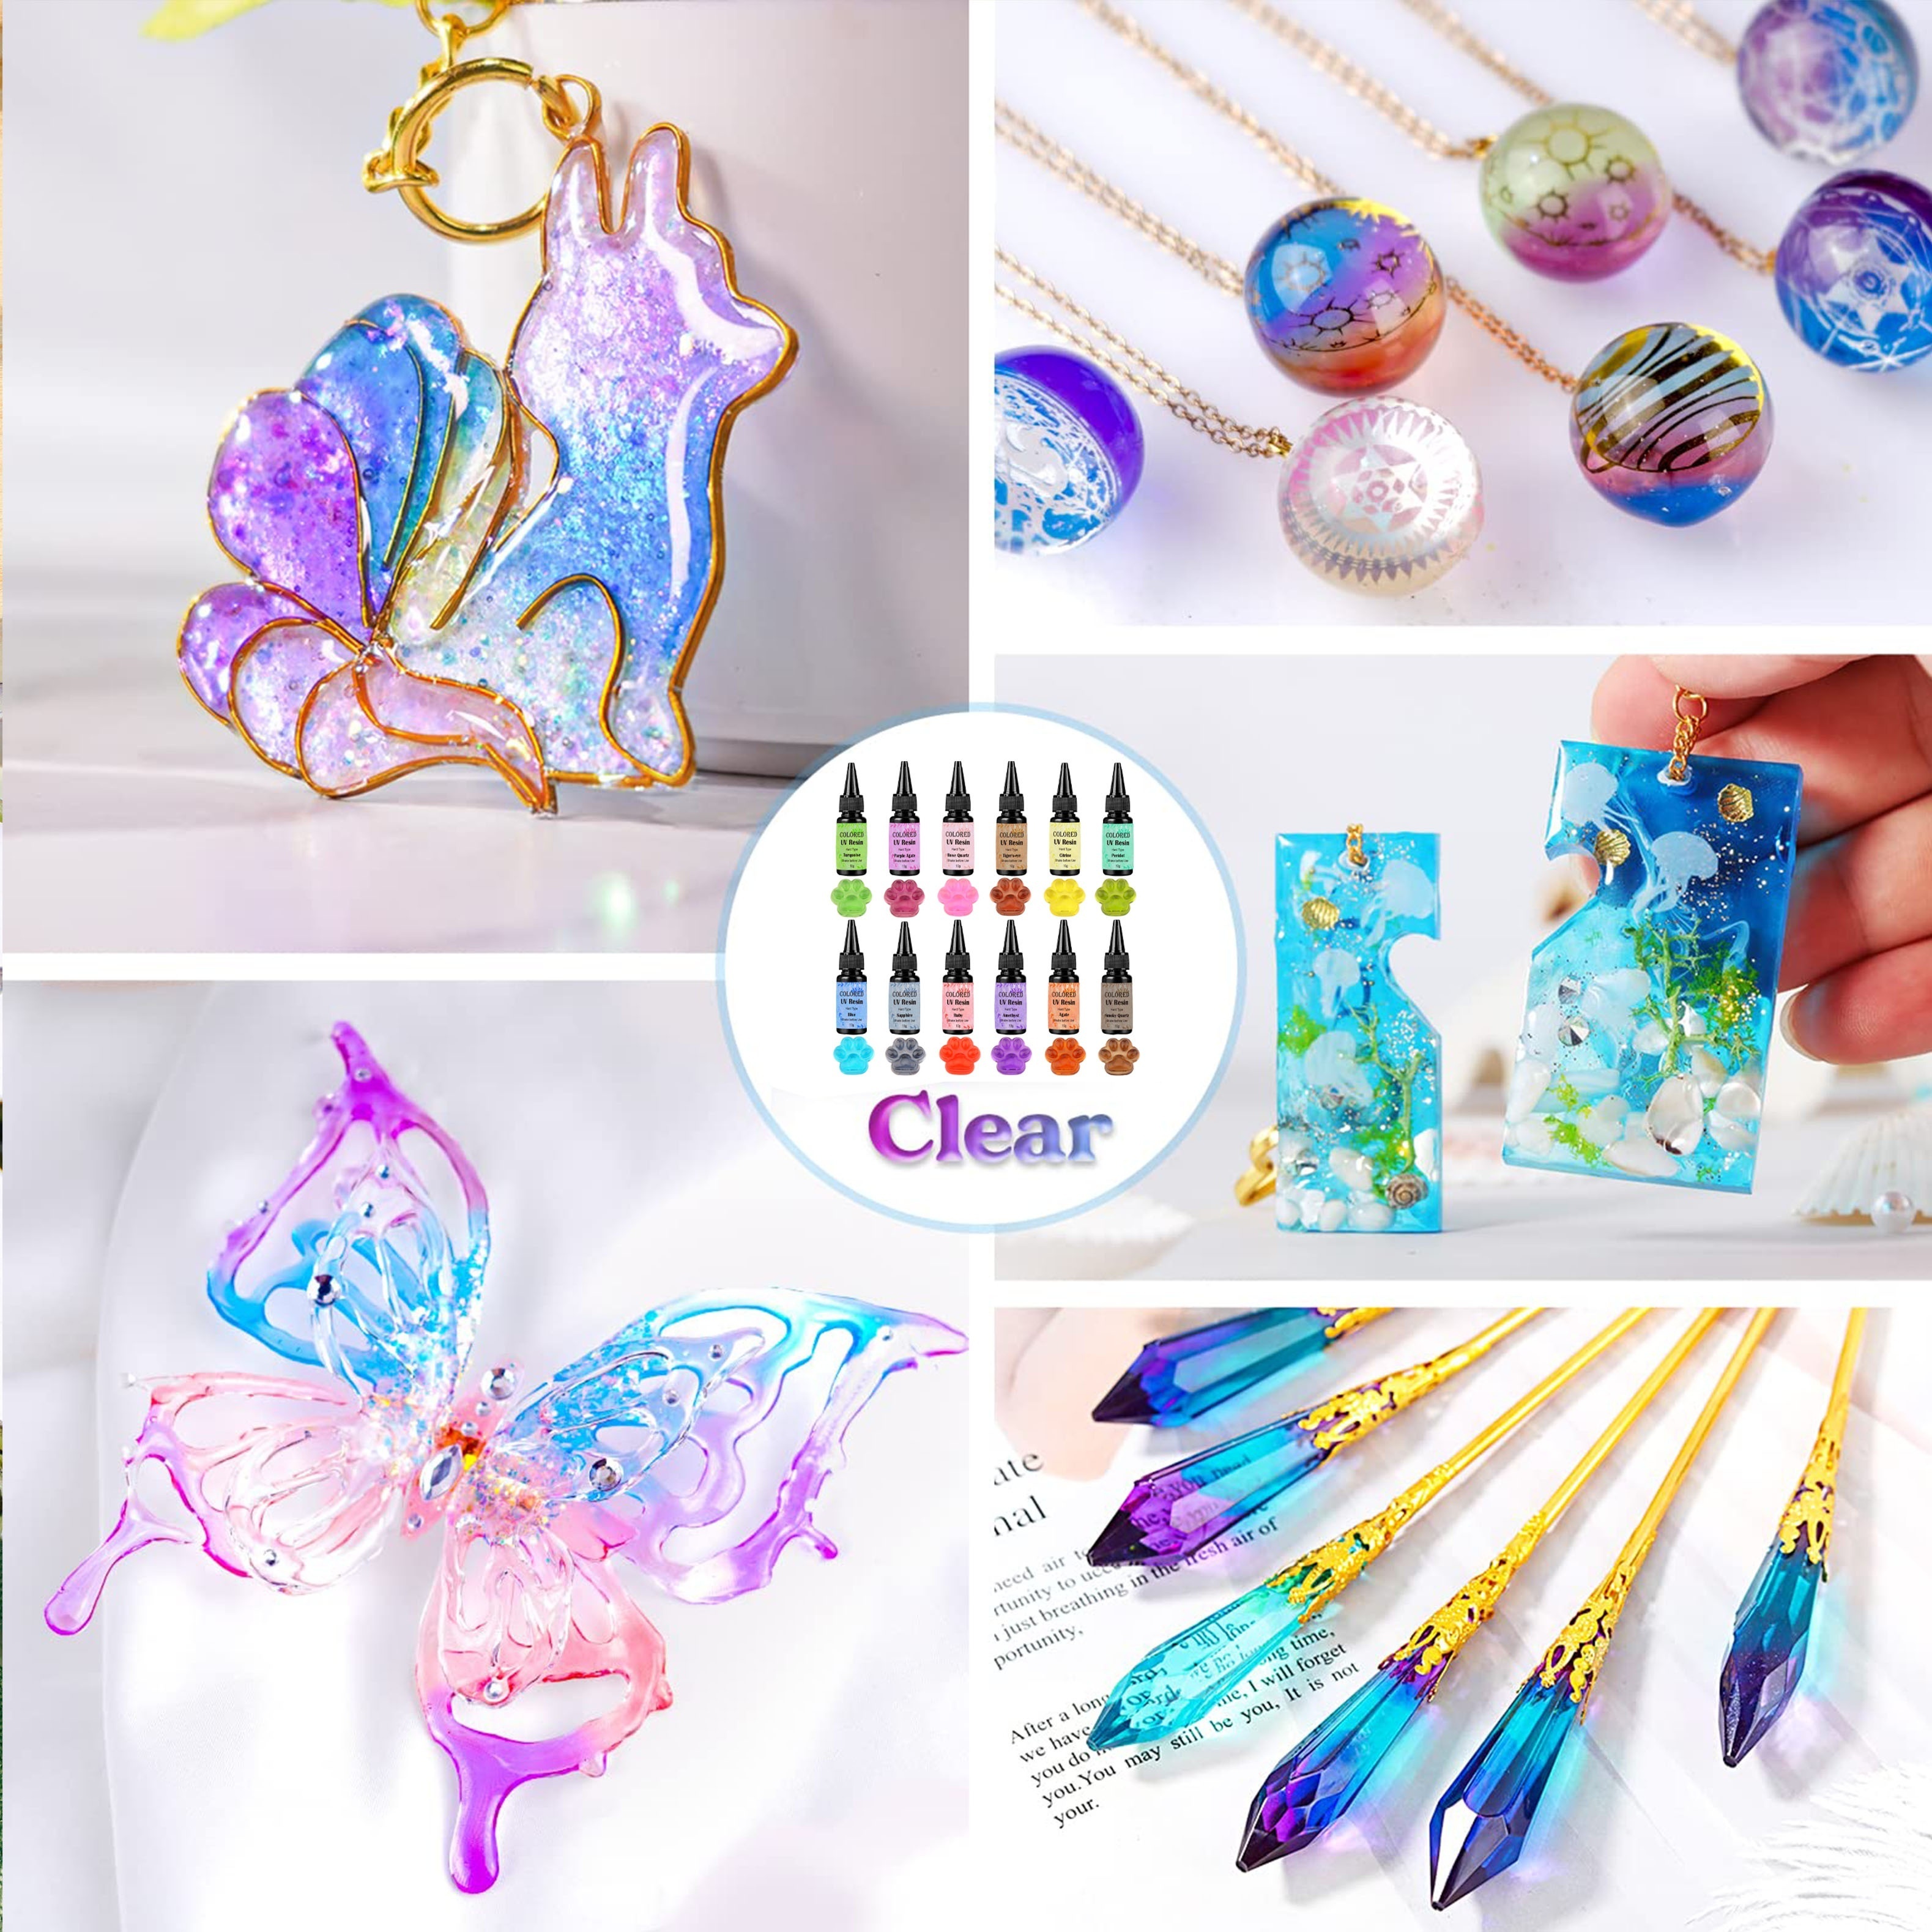 12 Colors UV Resin Ultraviolet Epoxy Resin Clear, Odorless & Low Shrinkage  UV Resin Kit For Crafts, Resin Dye, Jewelry Making Decoration